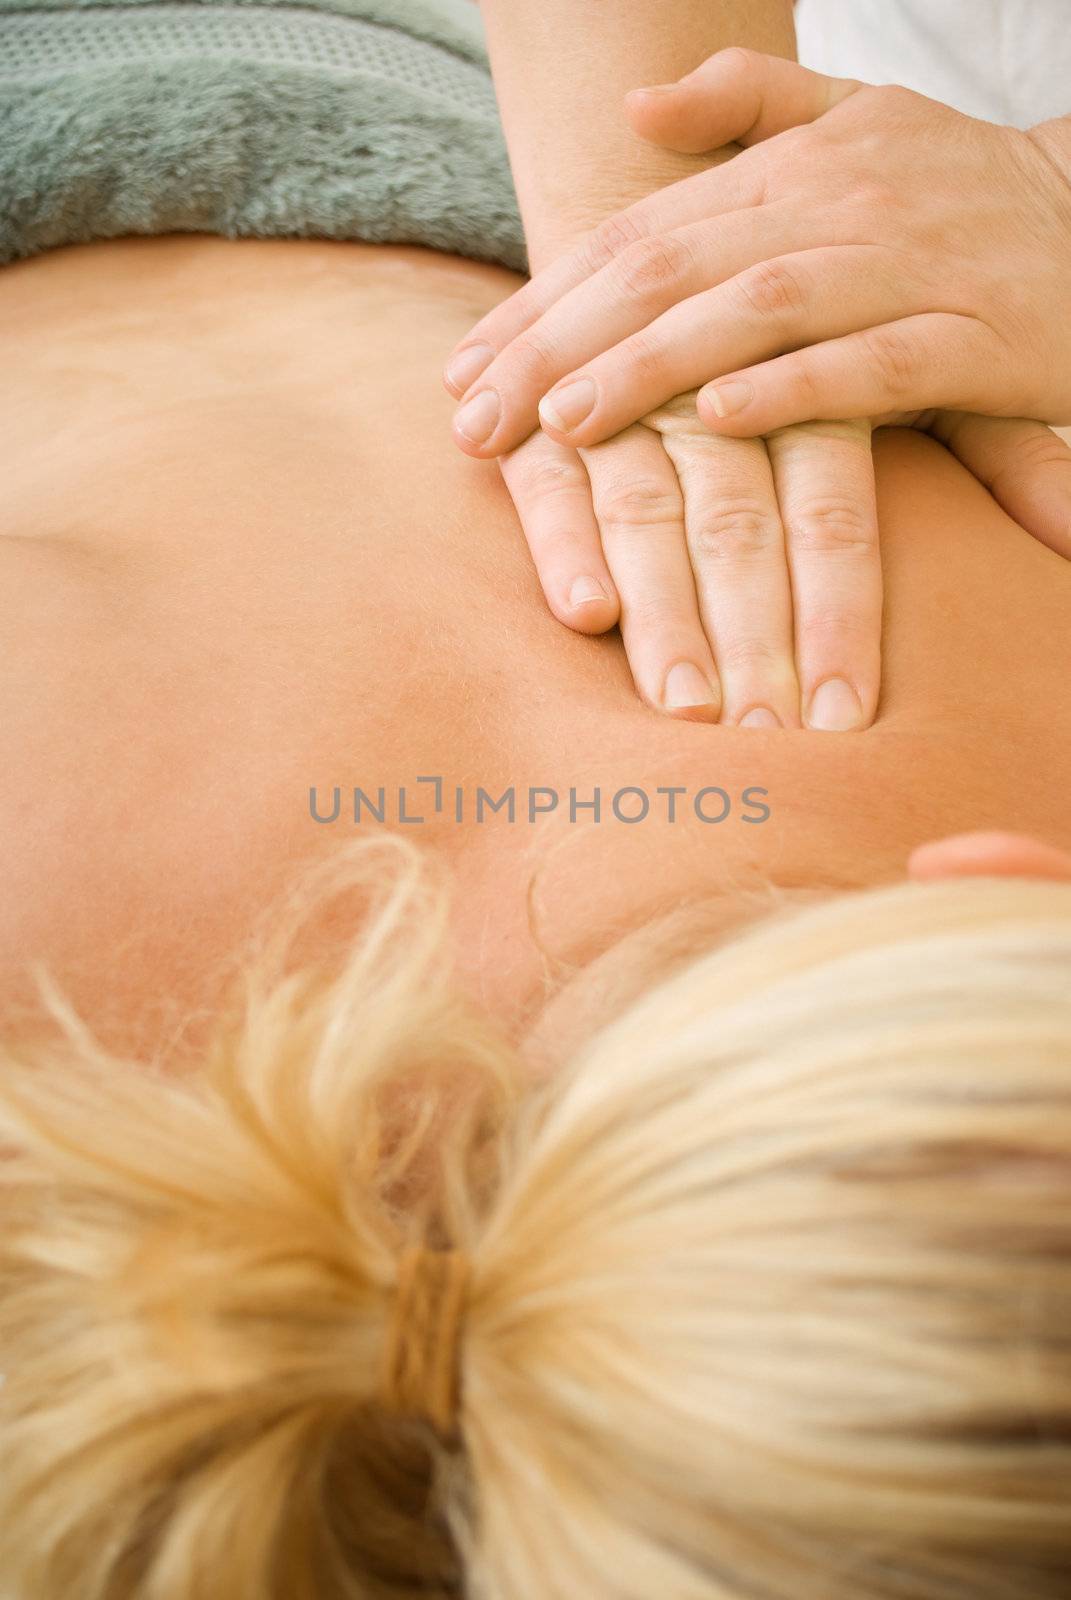 Beauty therapist hands performing spa back massage